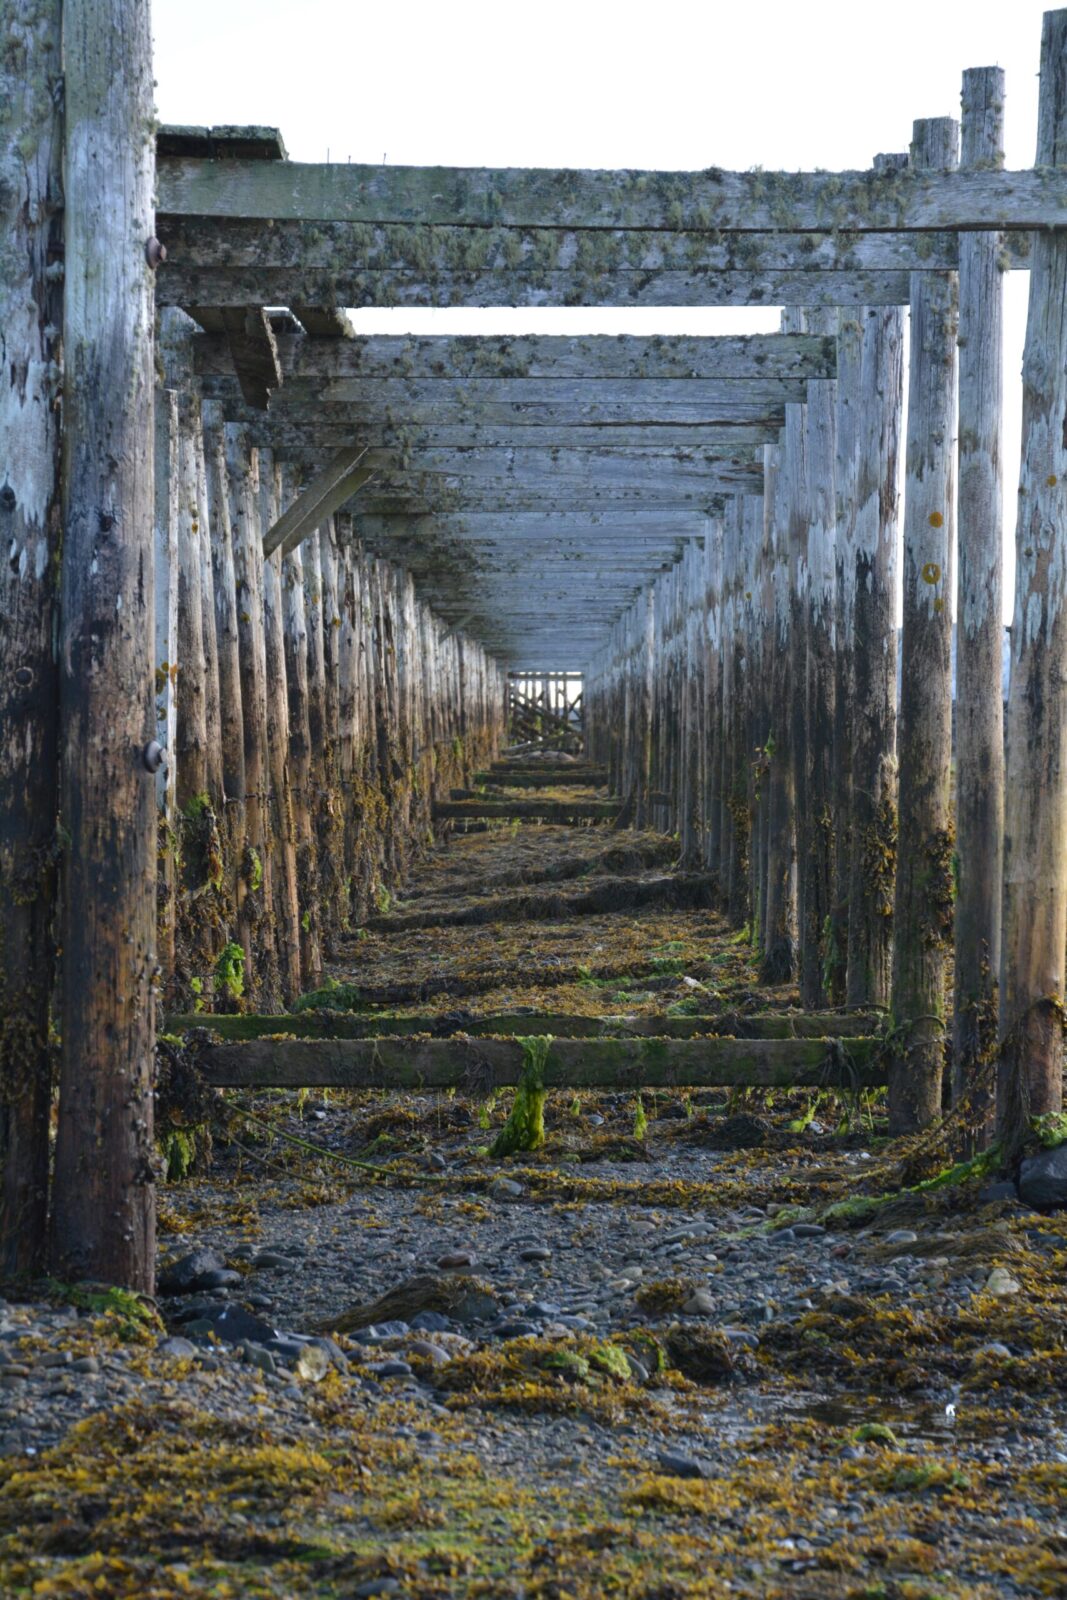 An old wooden pier with moss growing on it.